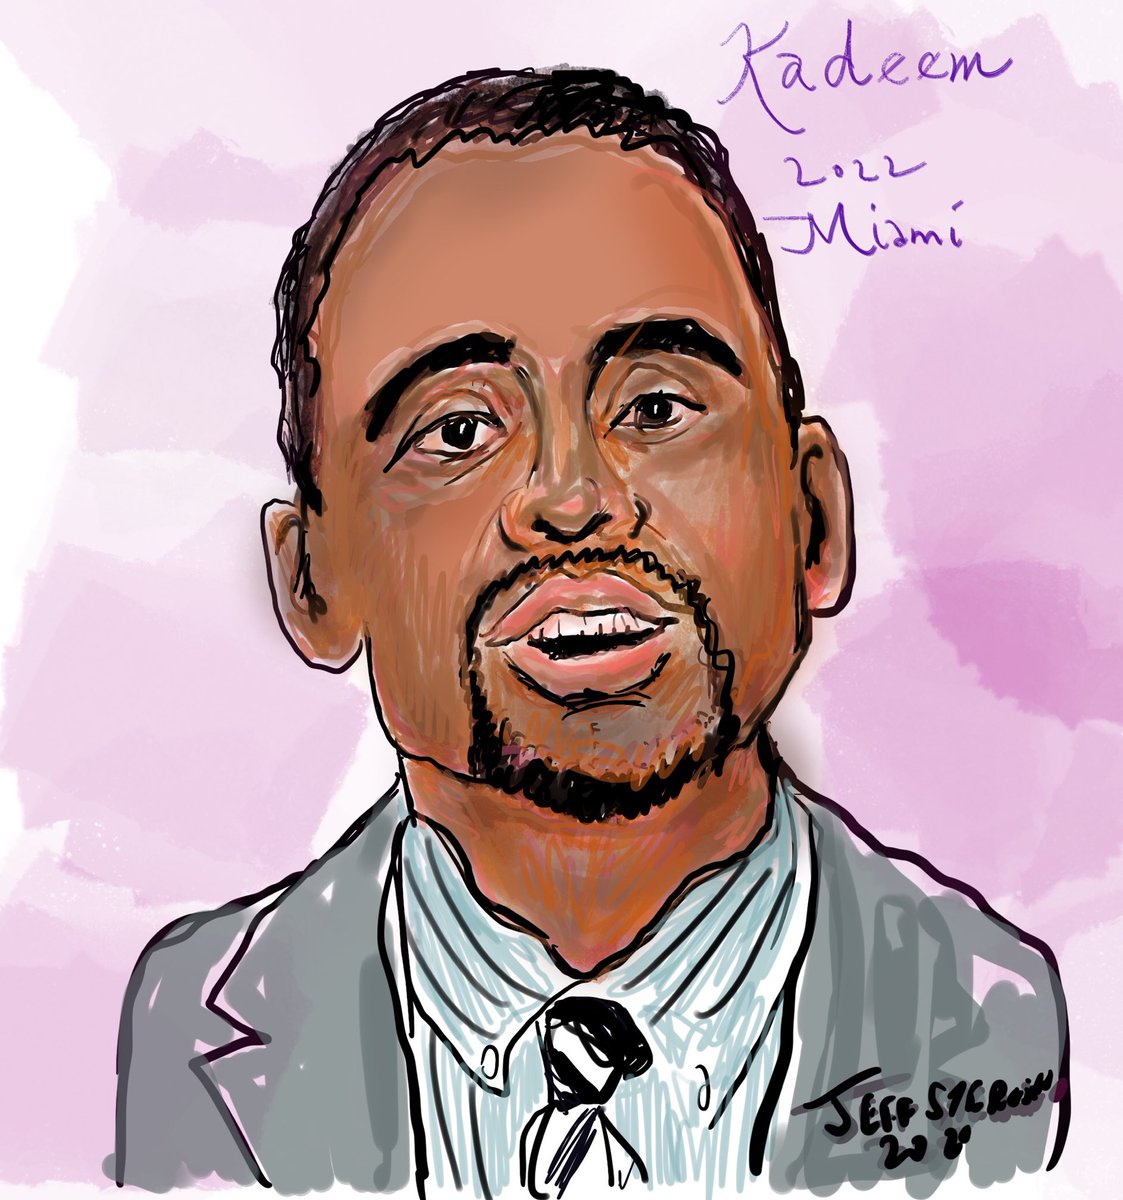 Kadeem, a #ChemicalEngineer attended an #AwardsDinner in #MiamiFlorida. Entertainment included #Caricature drawings featuring #DigitalCaricatures by #MiamiCaricatureArtist Jeff Sterling. For #Caricaturist availability in #MiamiDadeCounty: 305-831-2195 FloridaPartyArt.Com